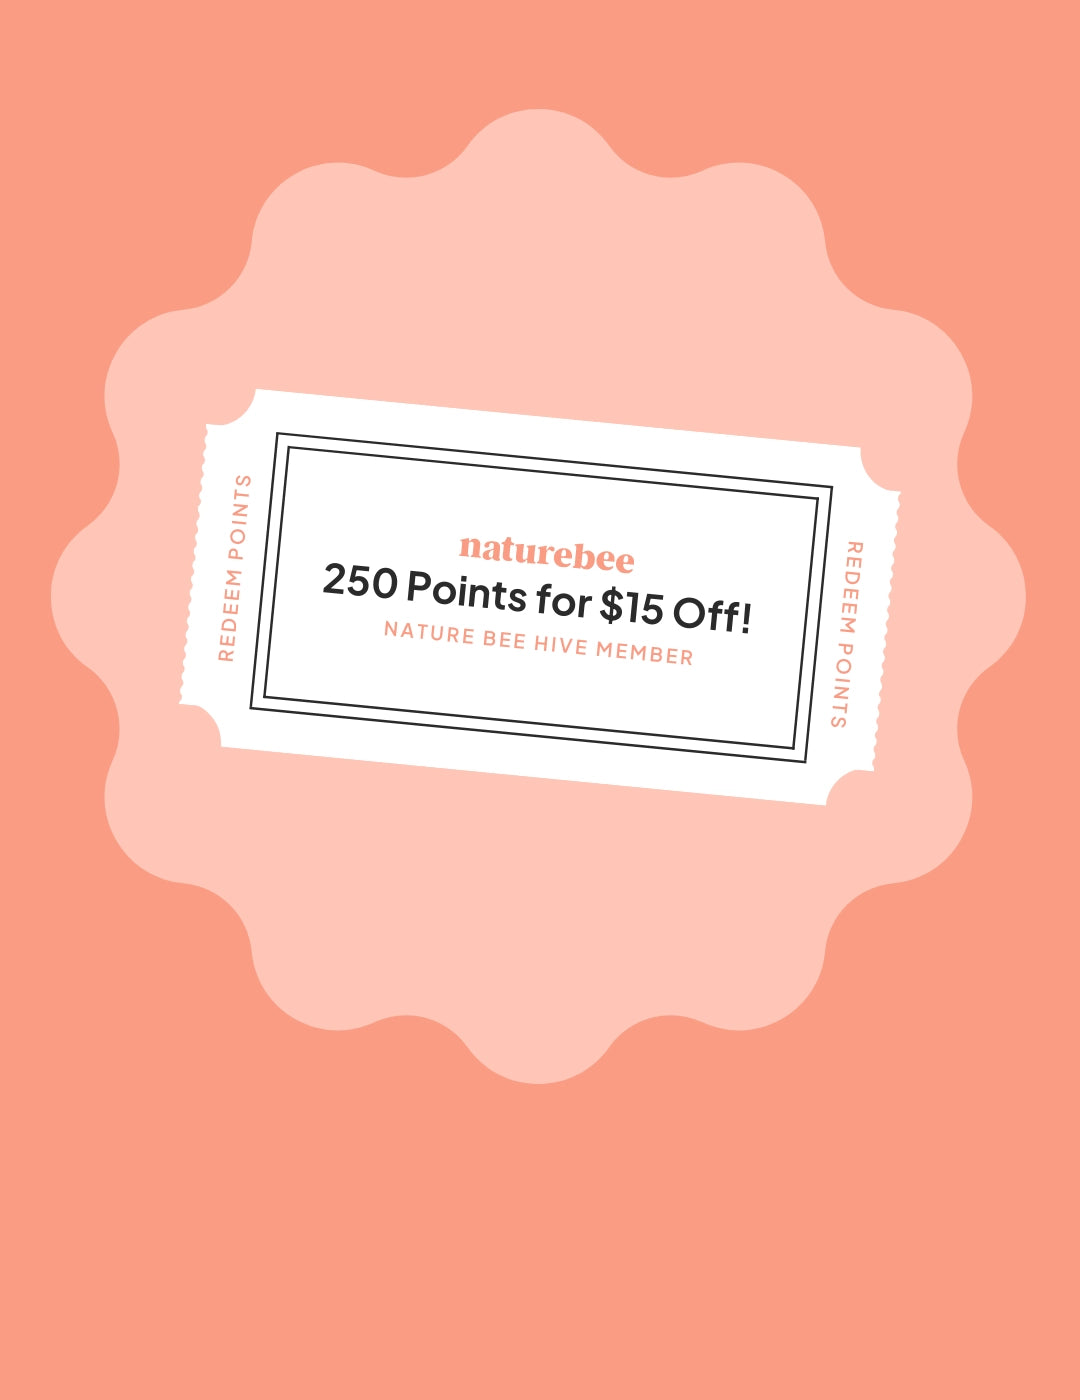 Pink background with a pink yellow icon in the middle. In the image is a ticket for Nature Bee's rewards program to redeem points. Redeem 250 points for $15 off your next order. 